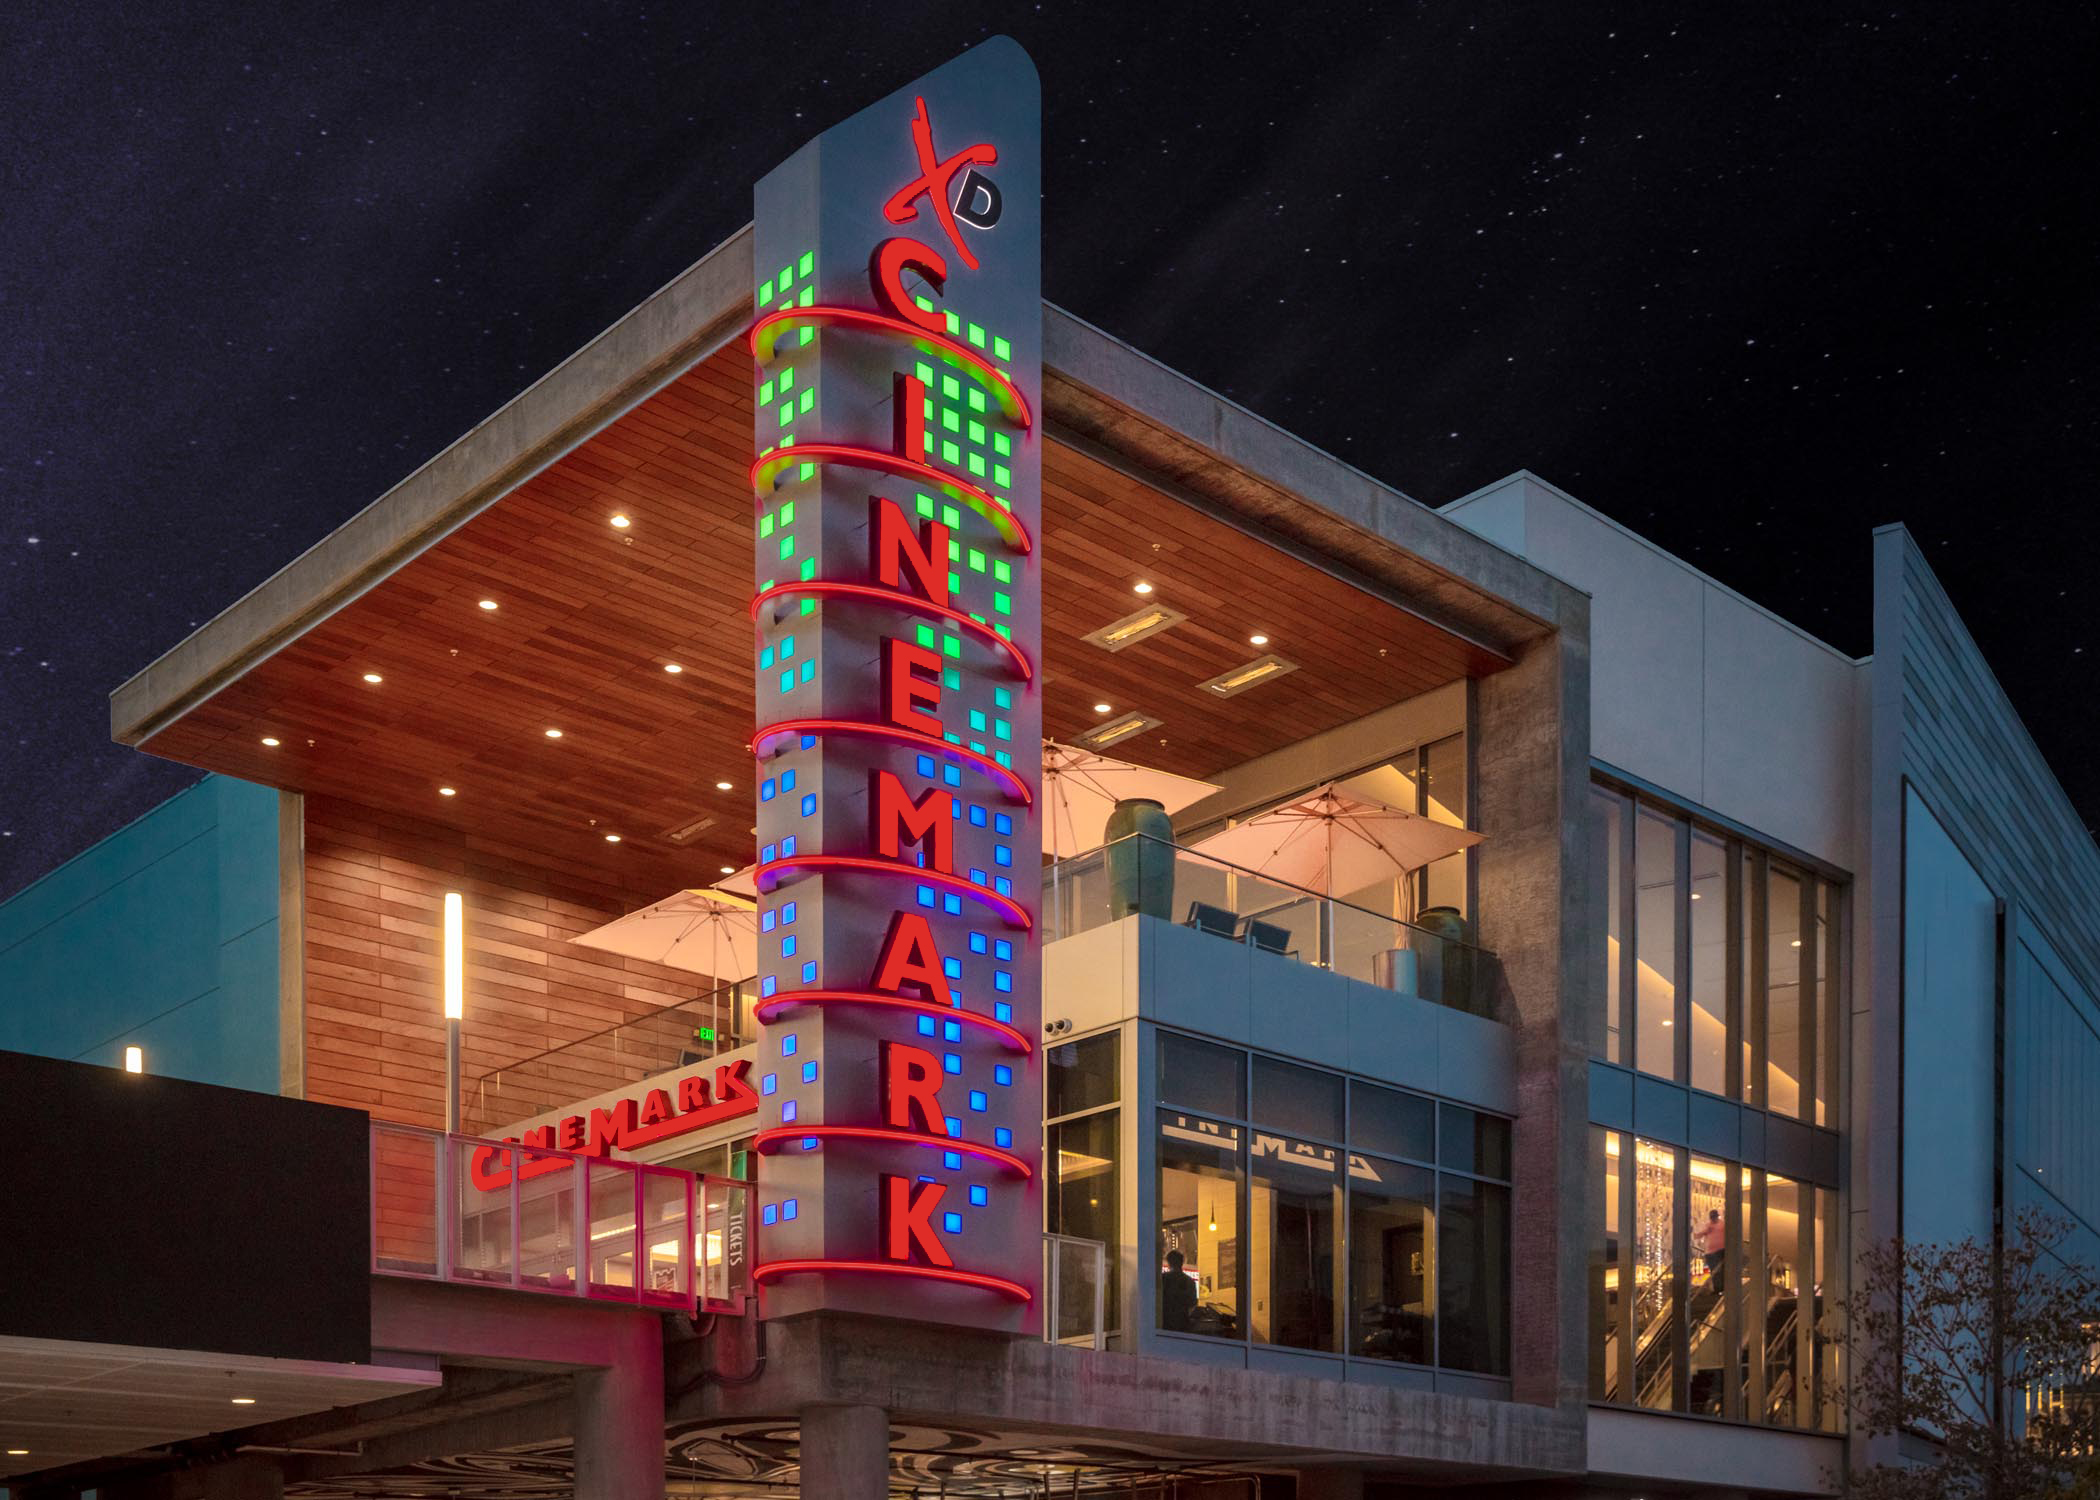 Cinemark<strong>View Case Study</strong>